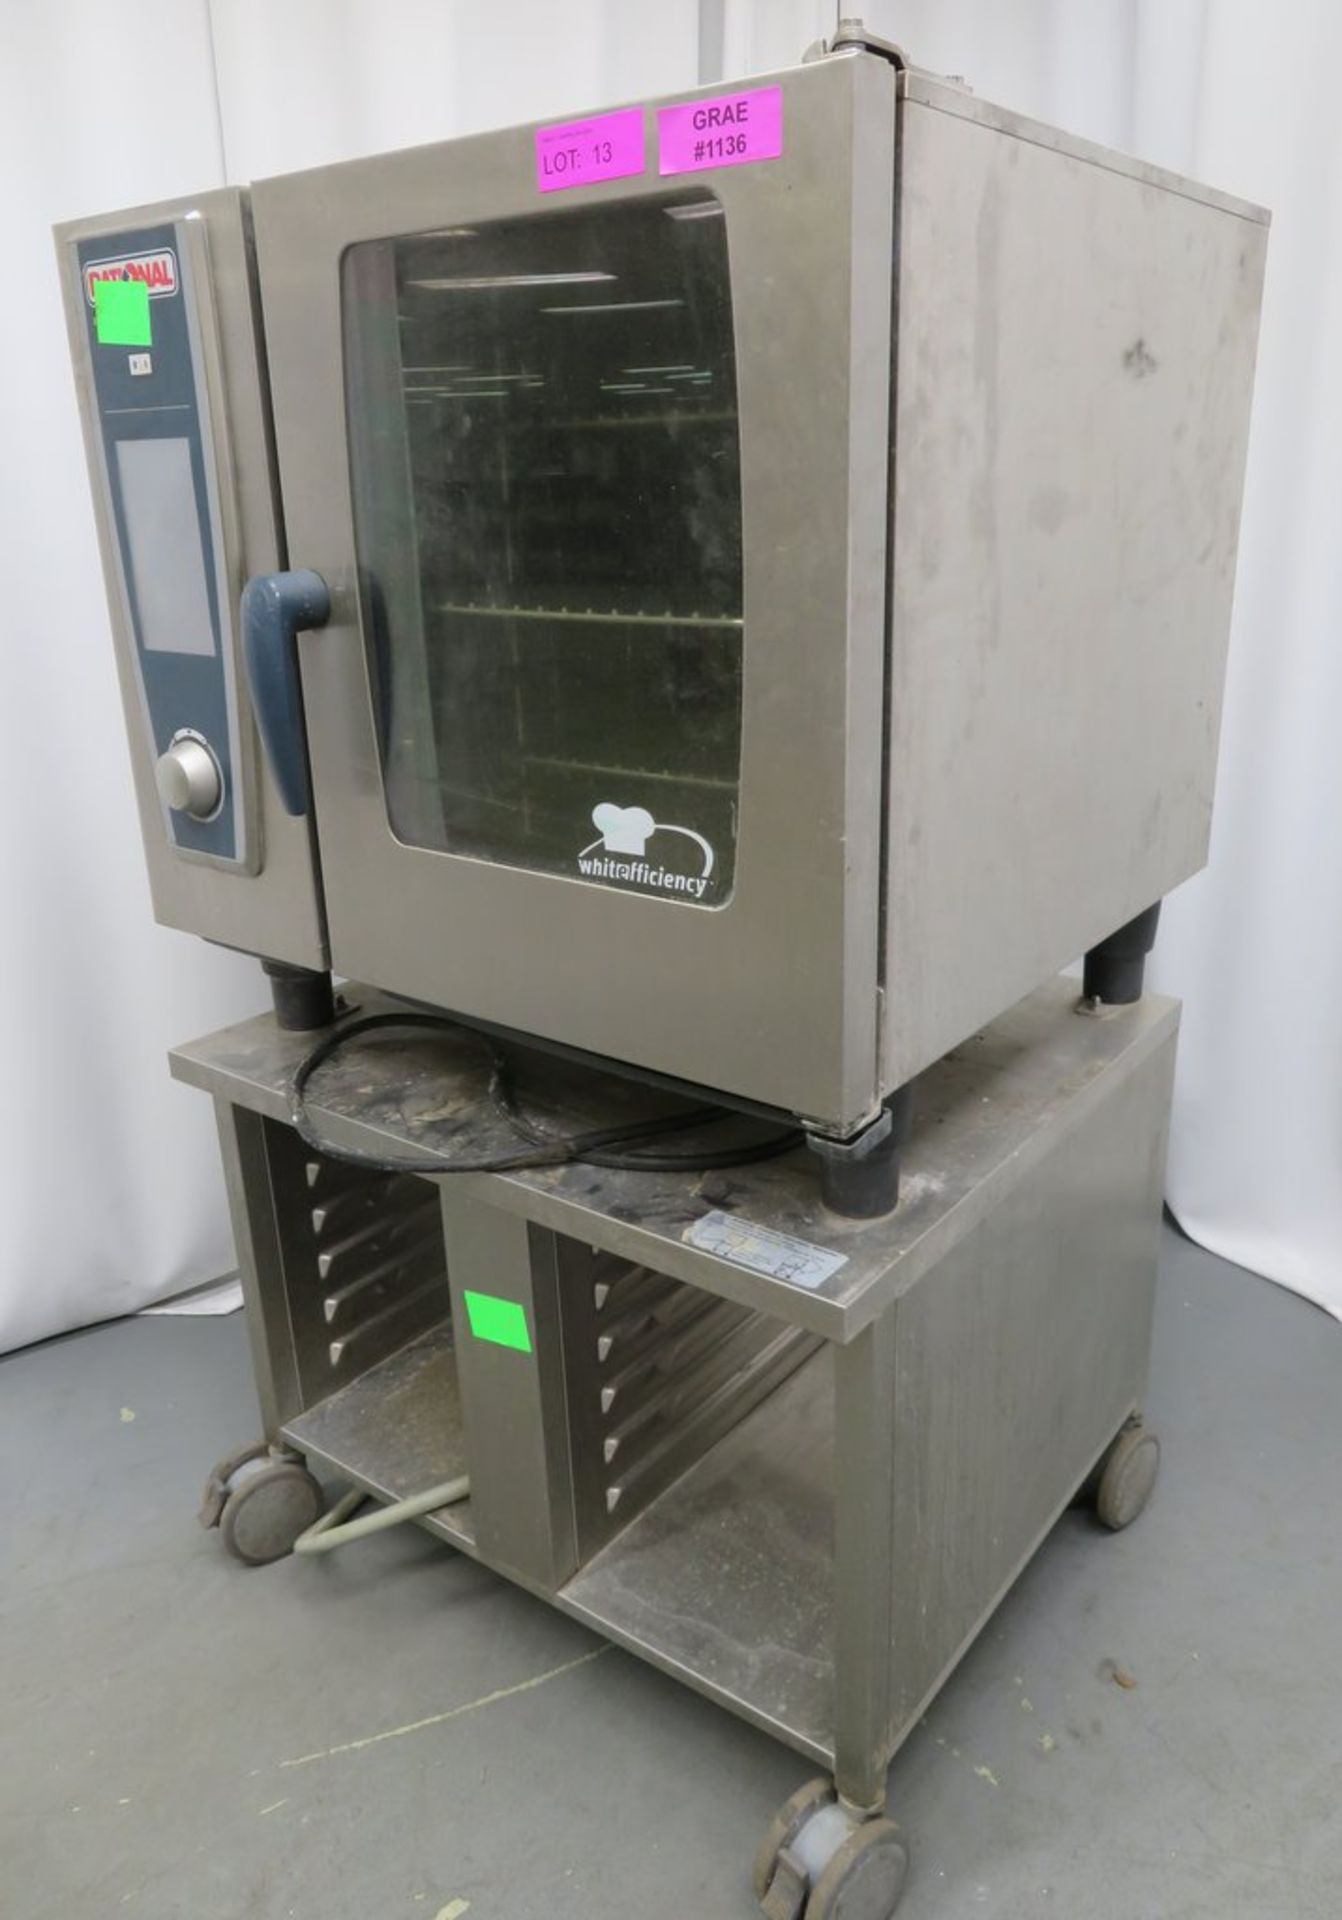 Rational SCC WE 61 6 grid combi oven, 3 phase electric - Image 3 of 9